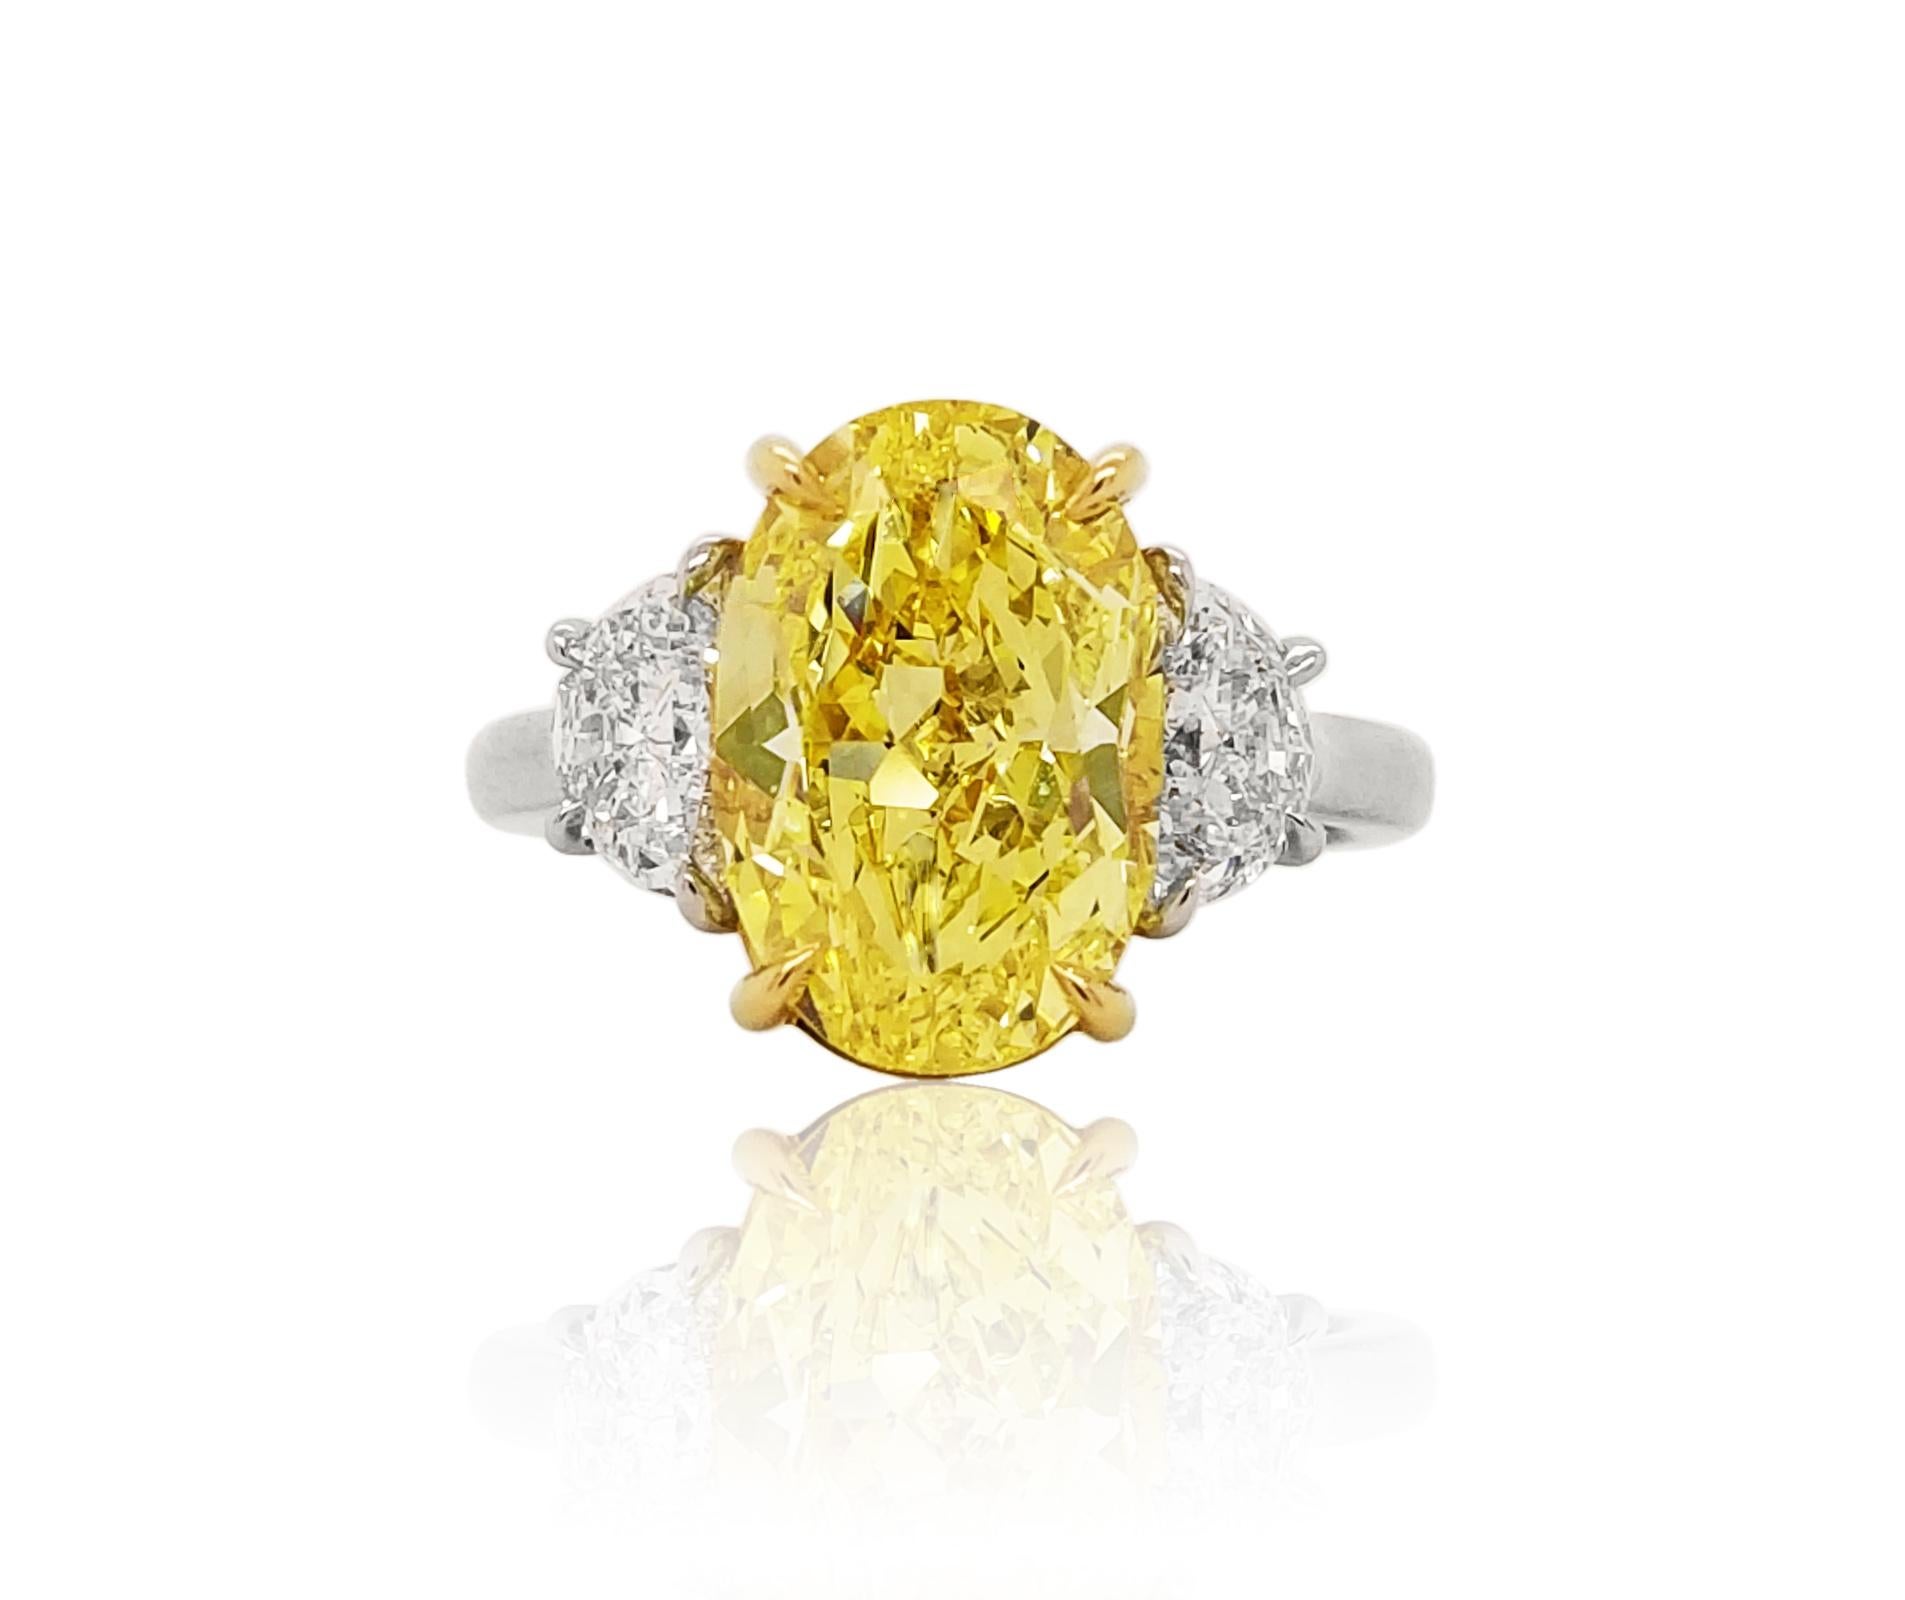 Radiant Cut Scarselli 4+ Carat Fancy Vivid Yellow Oval Diamond Ring For Sale